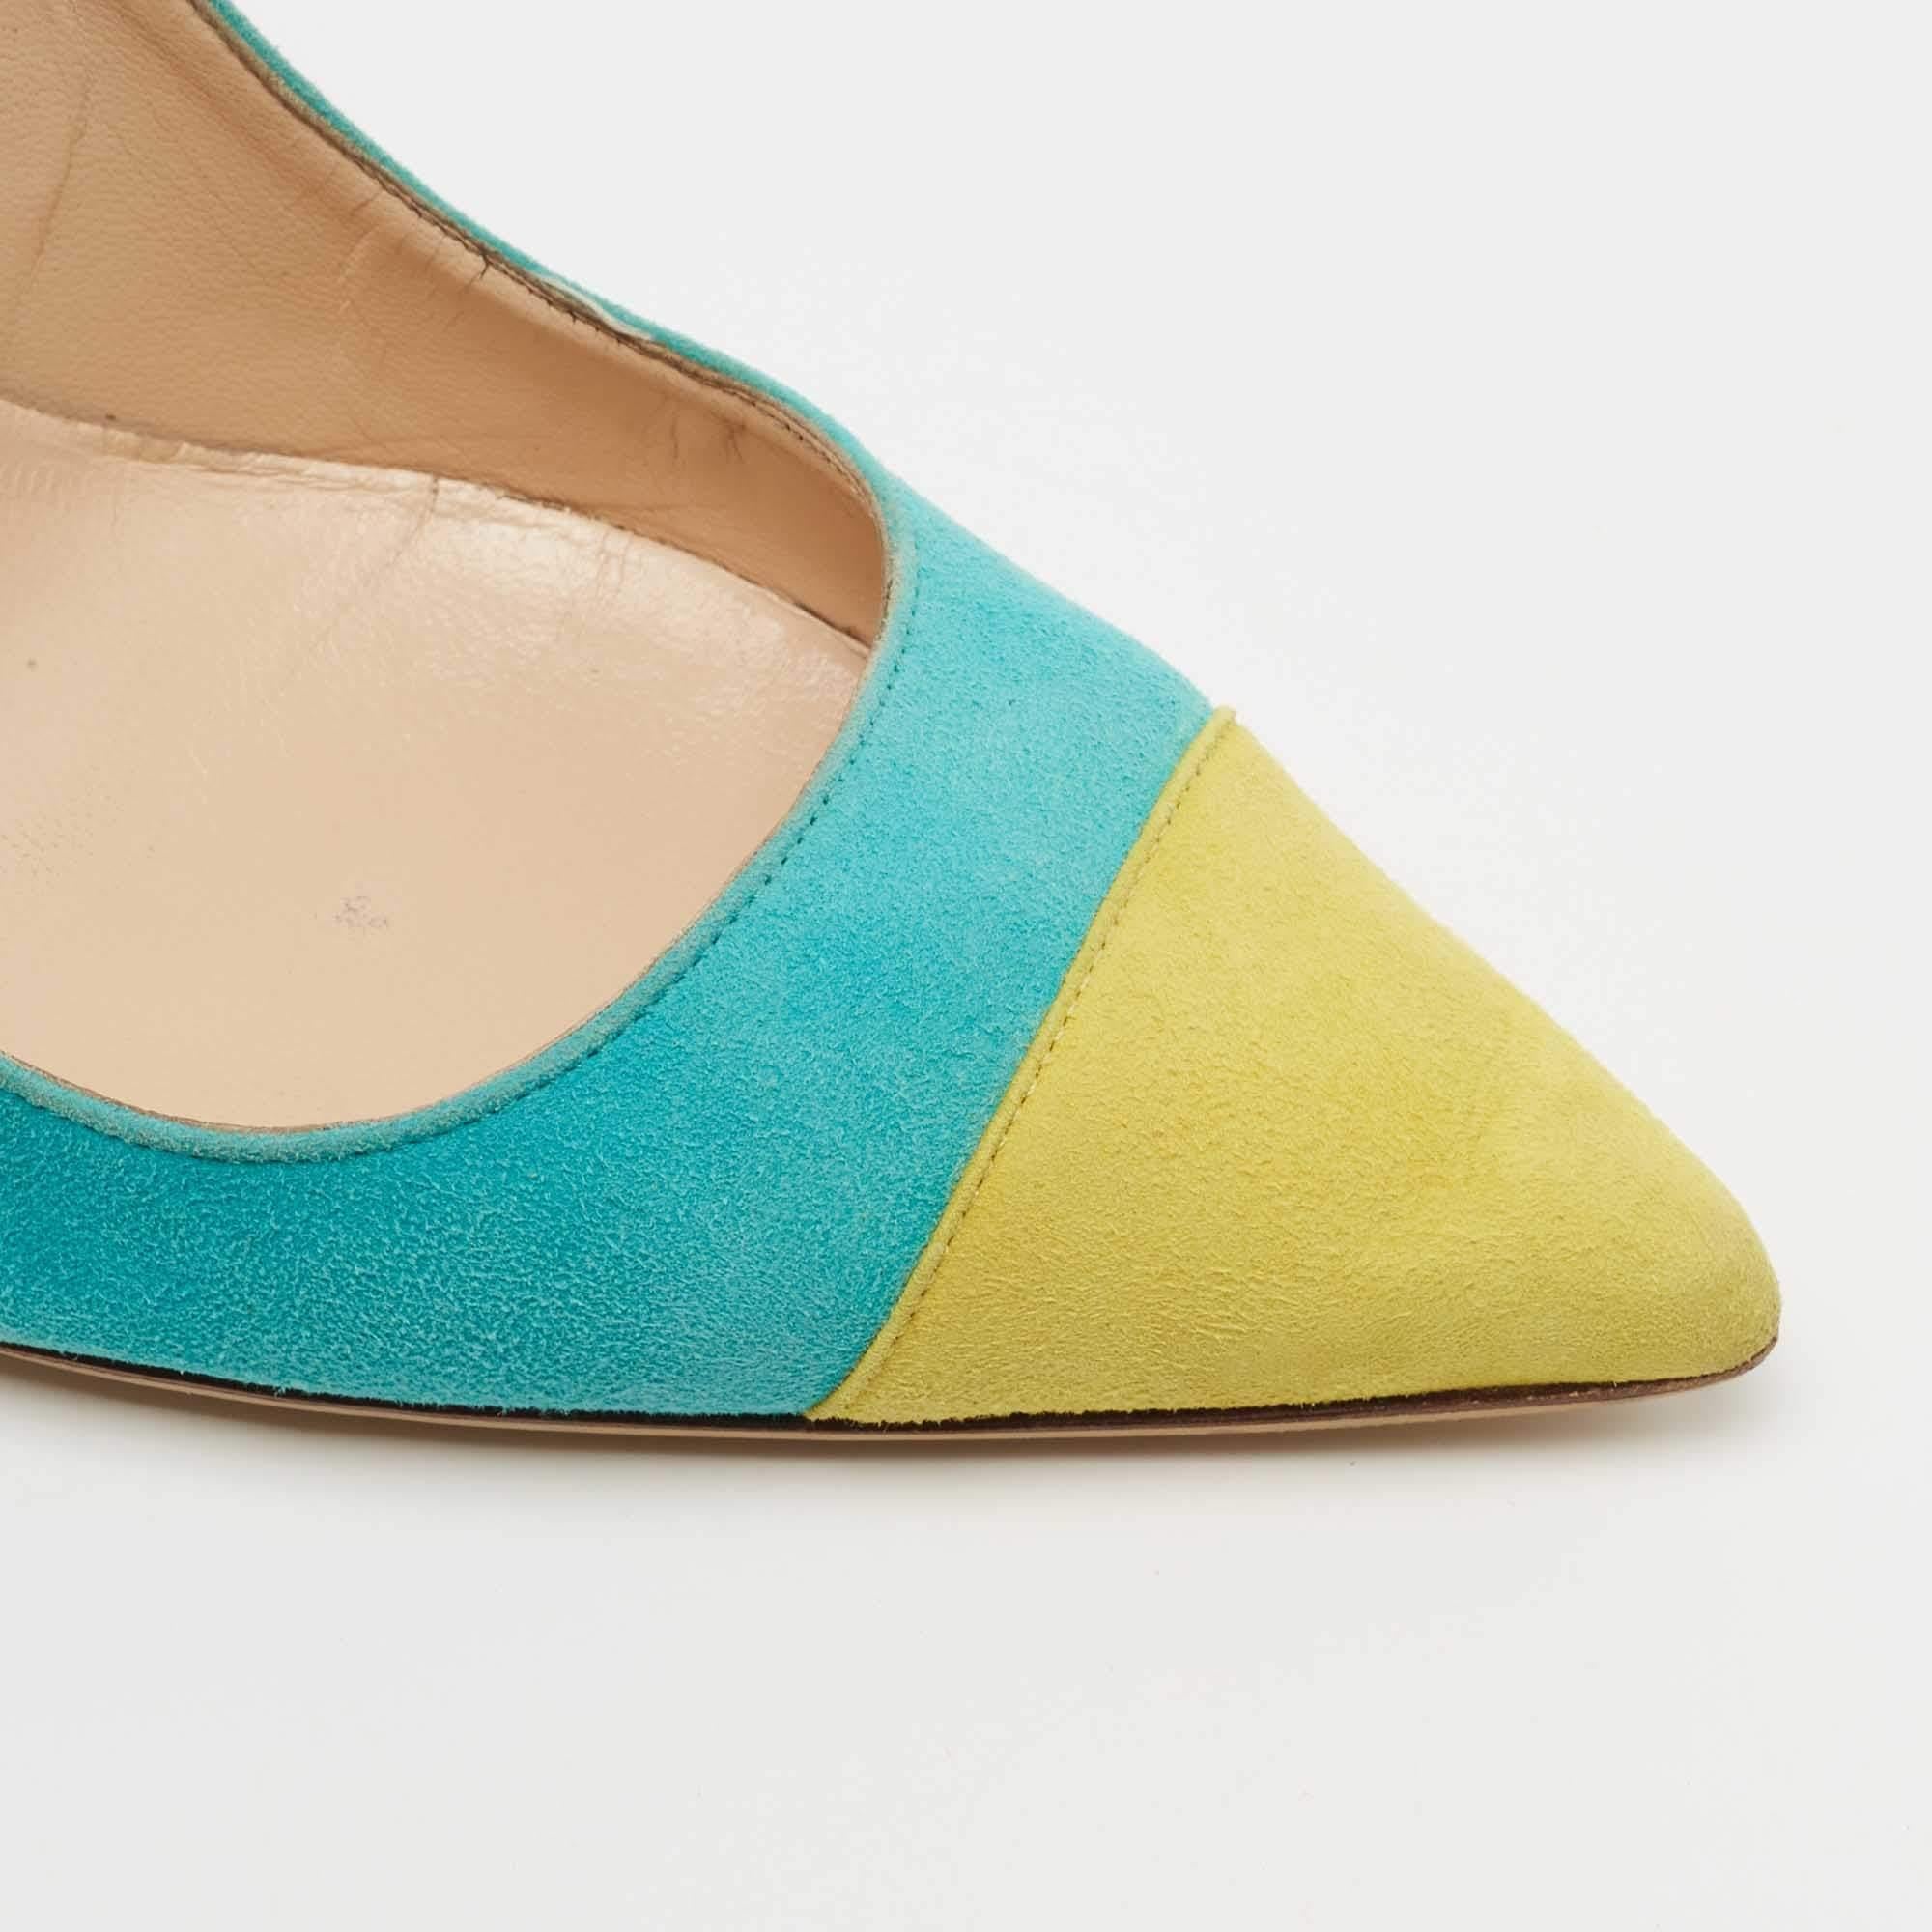 Manolo Blahnik Turquoise/Yellow Suede Bipunta Pumps Size 37.5 For Sale 1